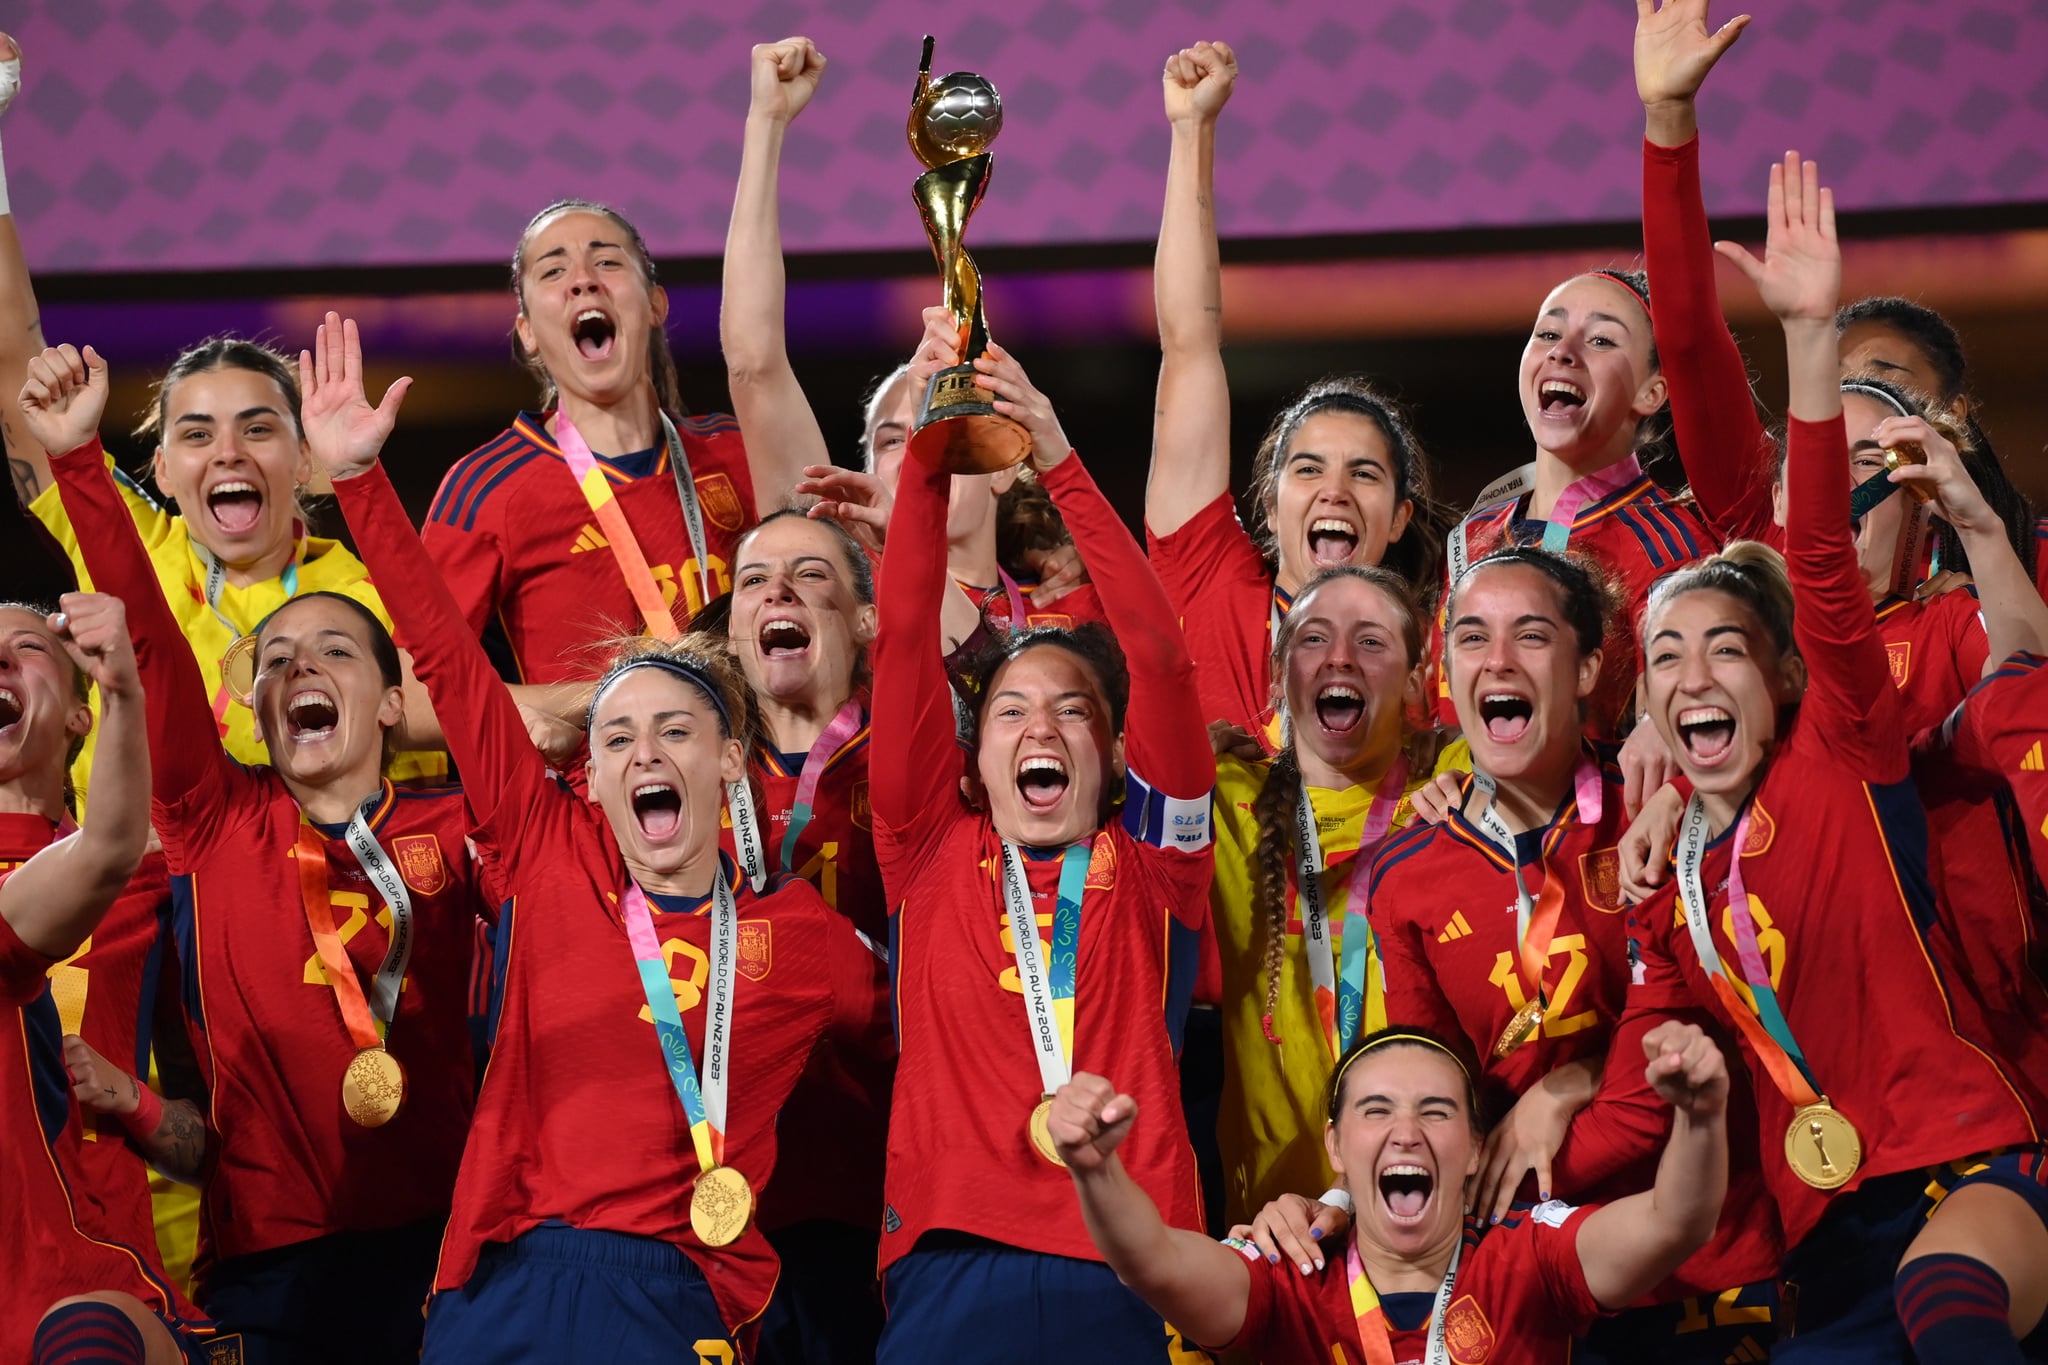 SYDNEY, AUSTRALIA - AUGUST 20: Ivana Andres of Spain lifts the FIFA Women's World Cup Trophy following victory in   during the FIFA Women's World Cup Australia & New Zealand 2023 Final match between Spain and England at Stadium Australia on August 20, 2023 in Sydney, Australia. (Photo by Justin Setterfield/Getty Images)